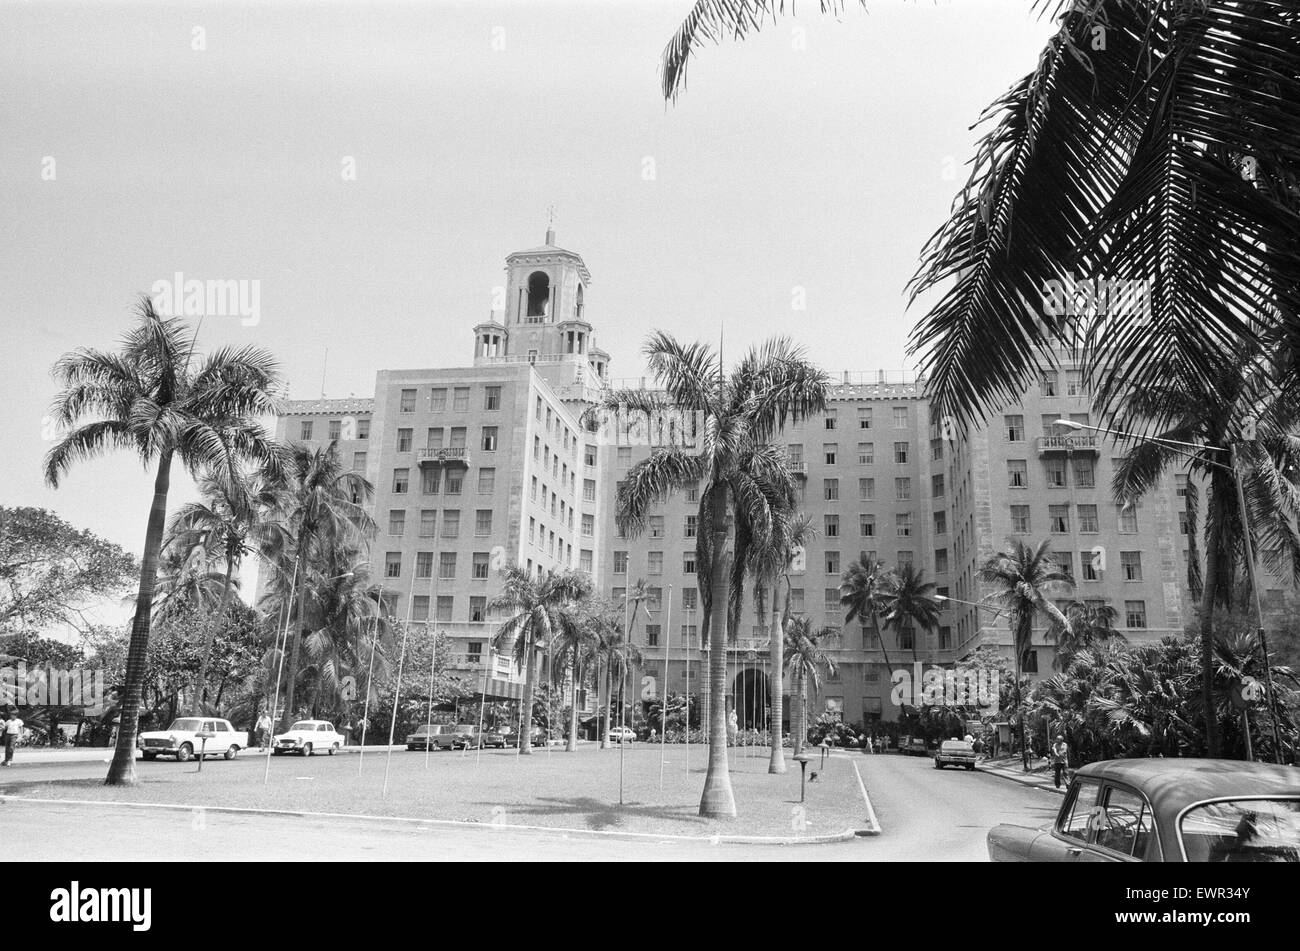 The Hotel Nacional de Cuba Havana, Cuba 21st May 1978 The hotel opened in 1930 and was popular with American tourists. During the Cuban missile crisis Fidel Castro and Che Guevara set up their headquarters here to prepare the defence of Havana from aerial Stock Photo